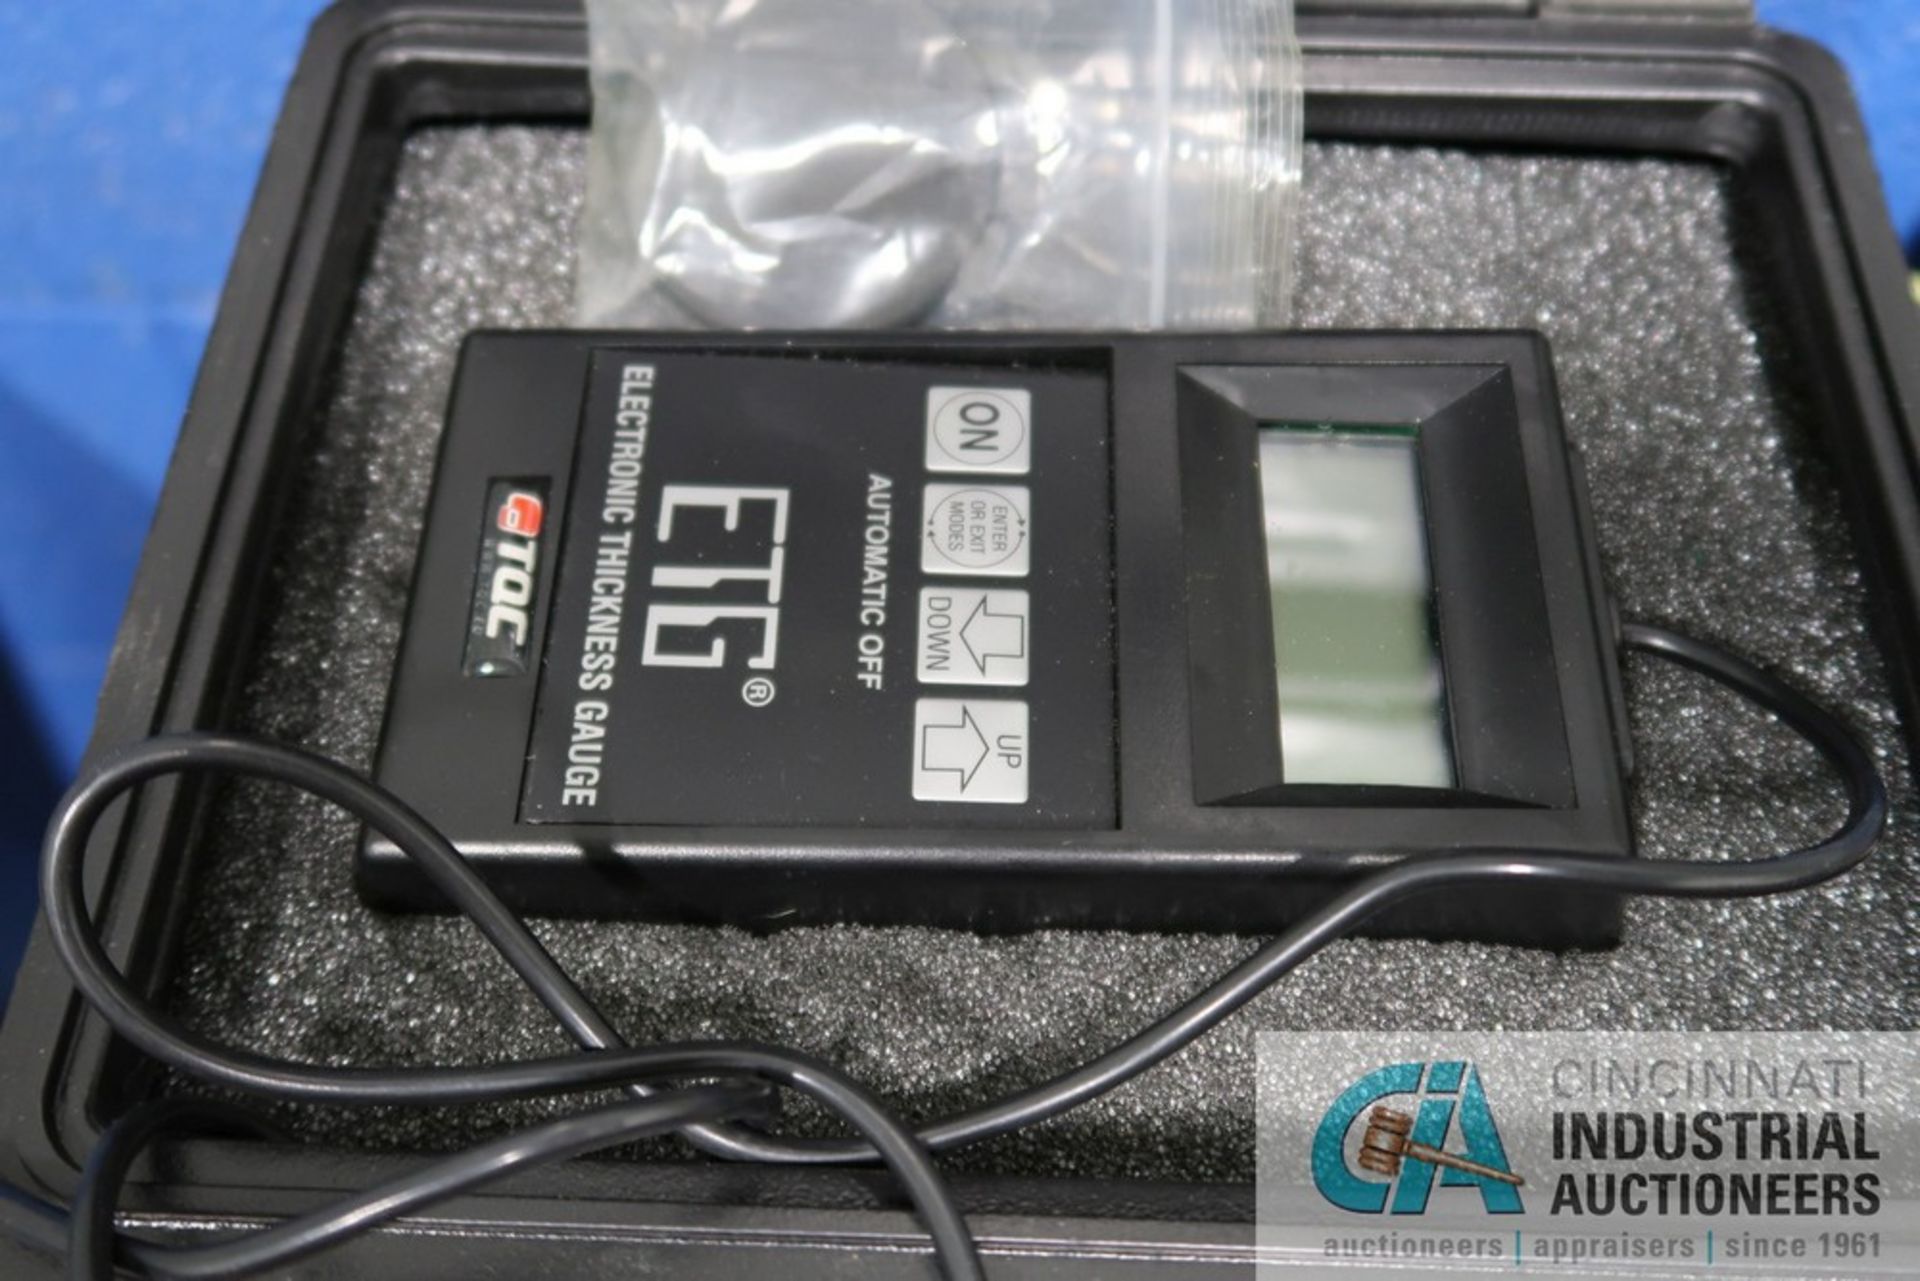 (LOT) TQC ELECTRONIC THICKNESS GAUGE AND ELCOMETER COATING THICKNESS METER